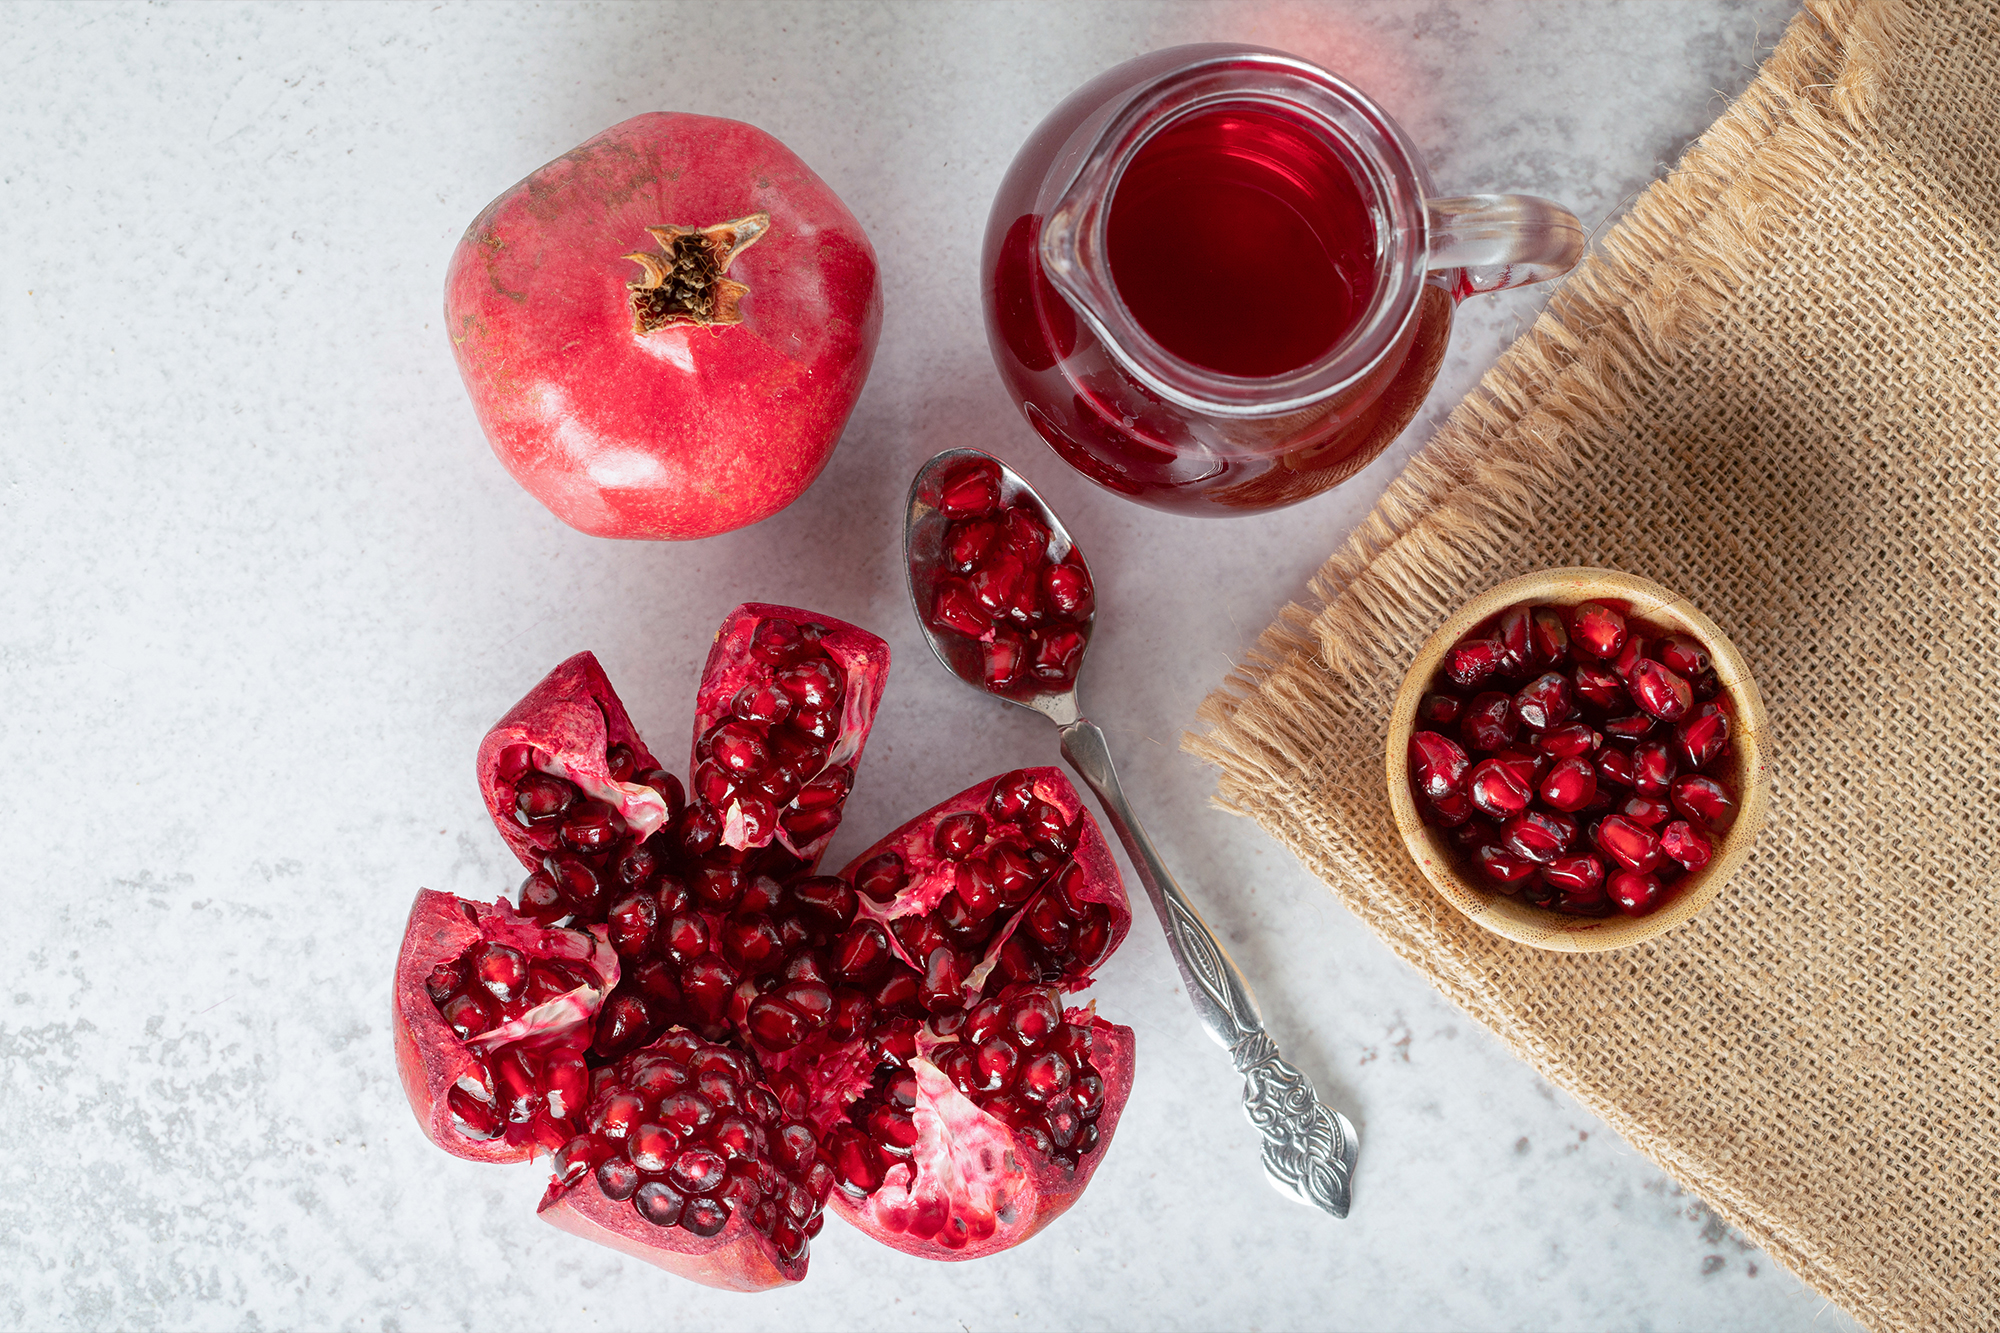 How to Cut a Pomegranate with a Cutting Board